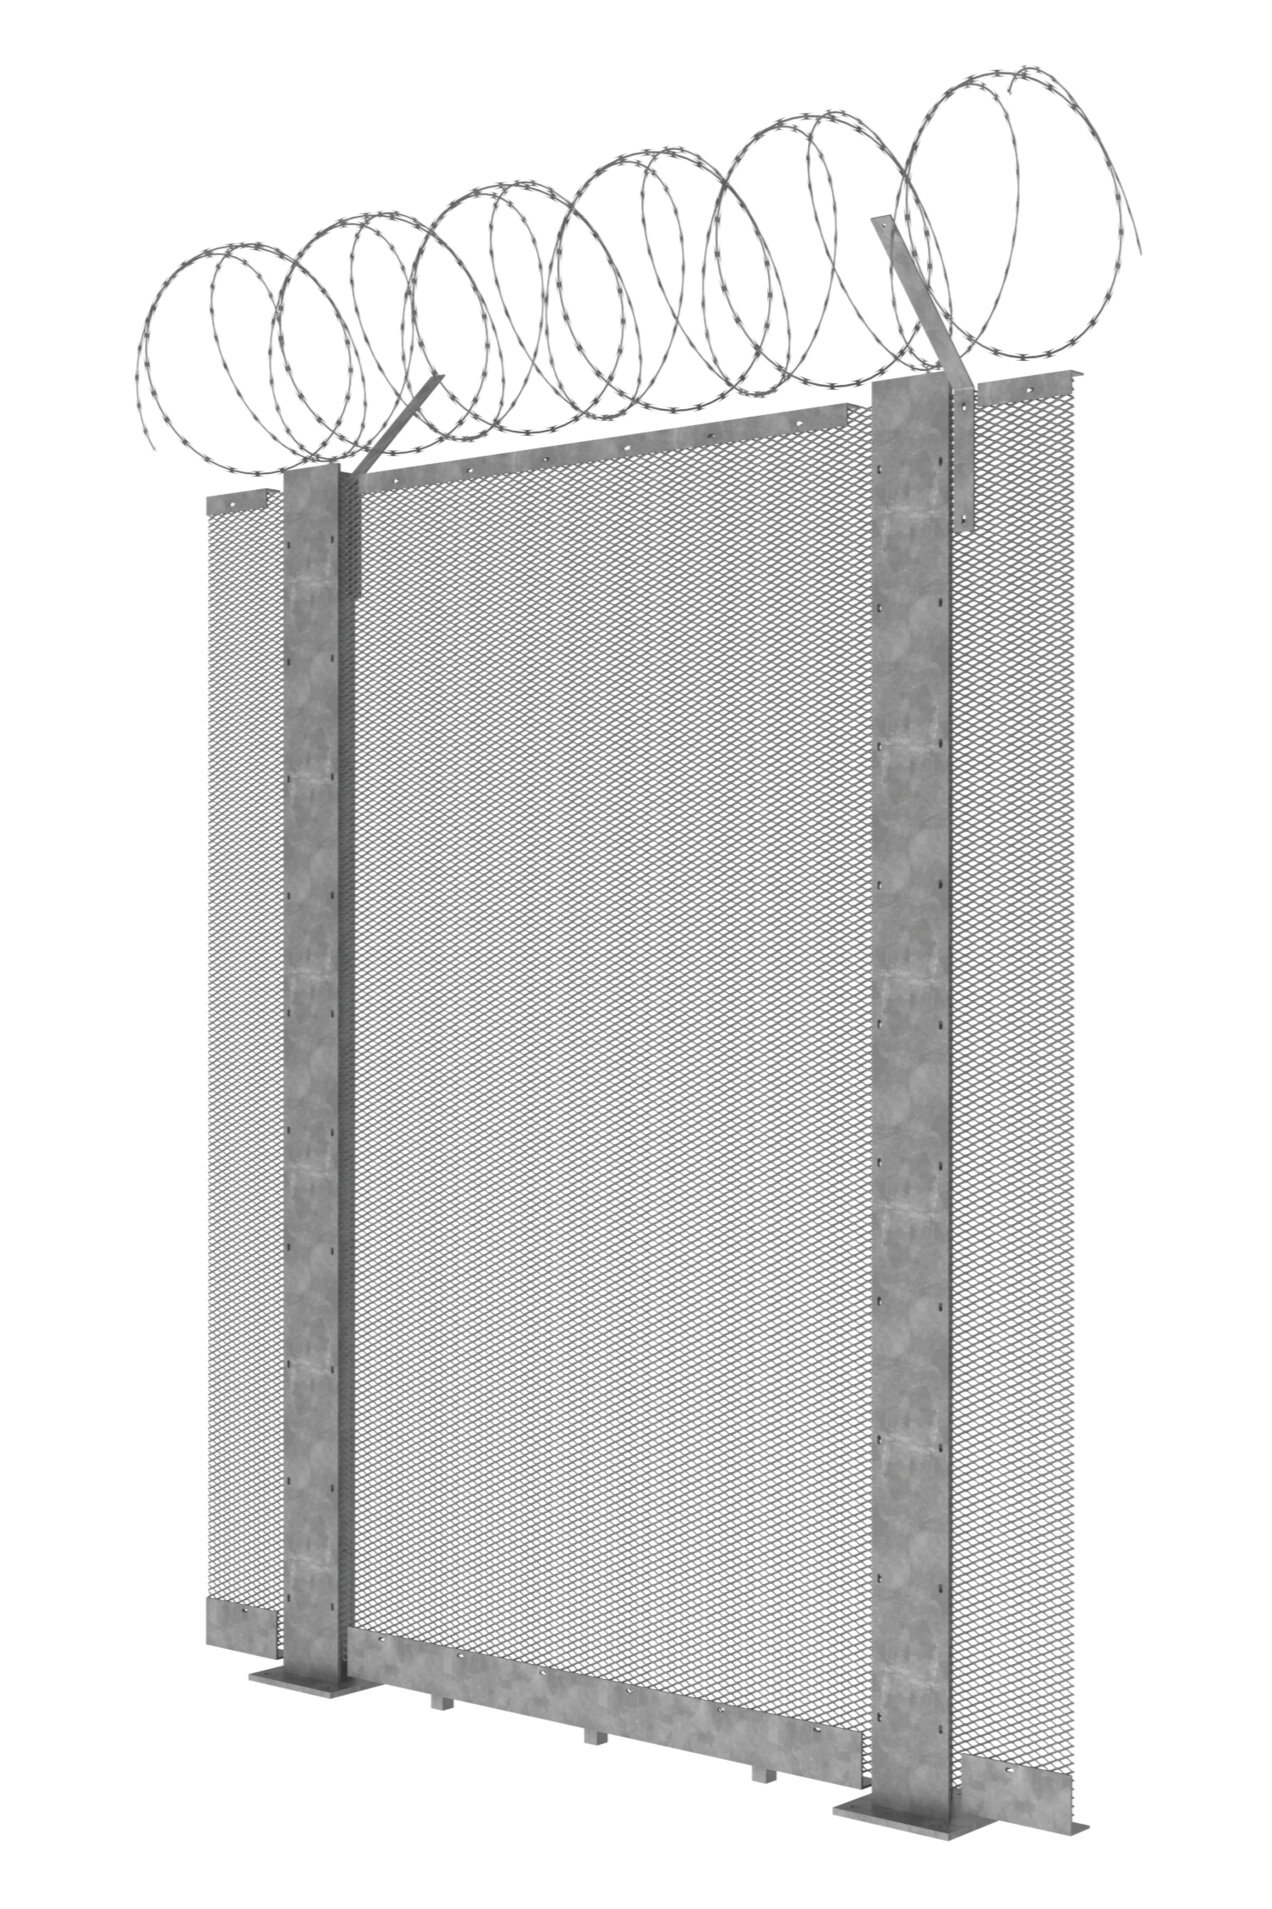 Expanded Mesh